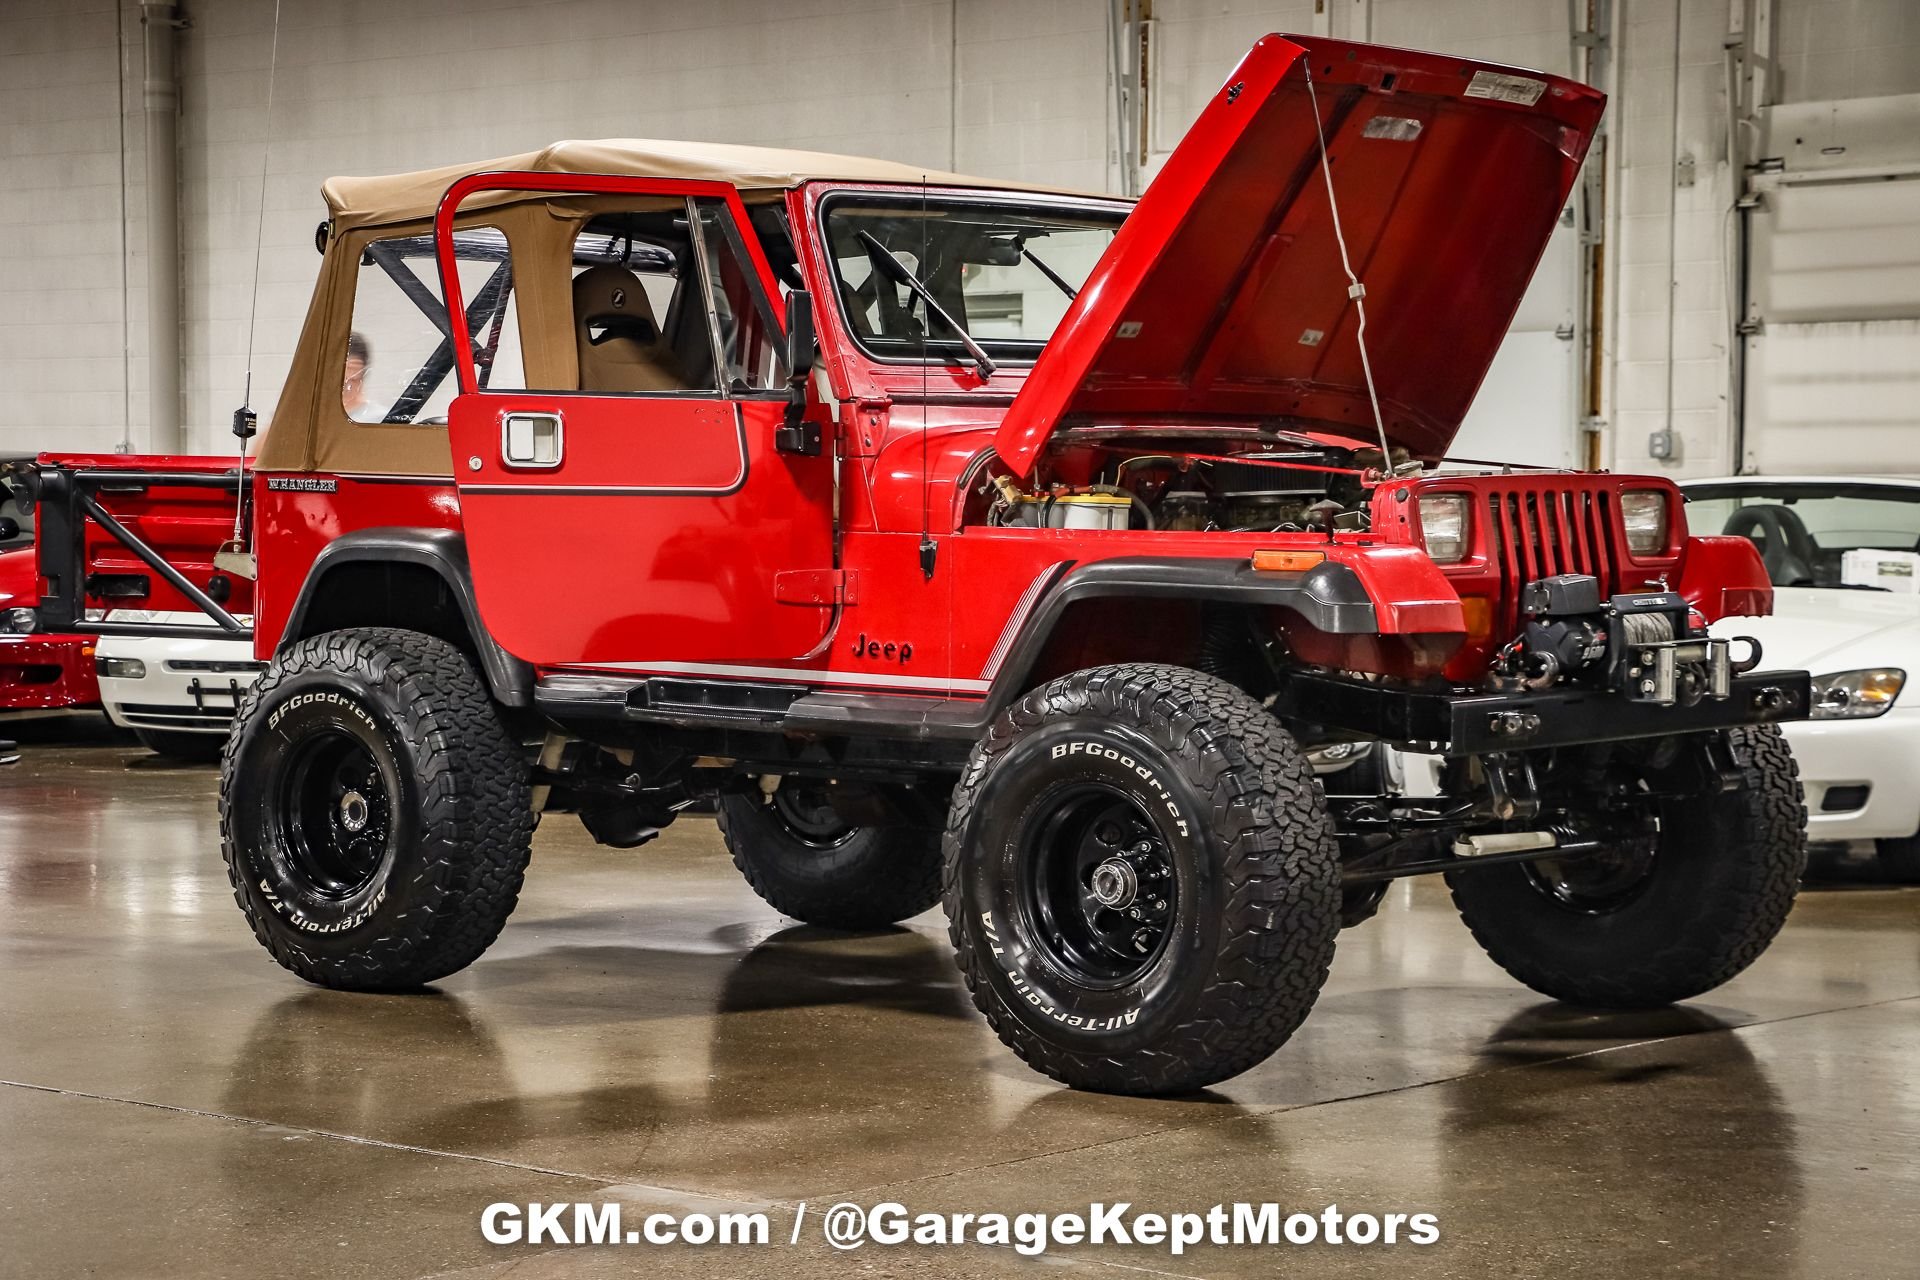 Lifted 1990 Jeep Wrangler (YJ) Looks Pretty Yet Cheap in 350ci, V8-Swapped  Red - autoevolution